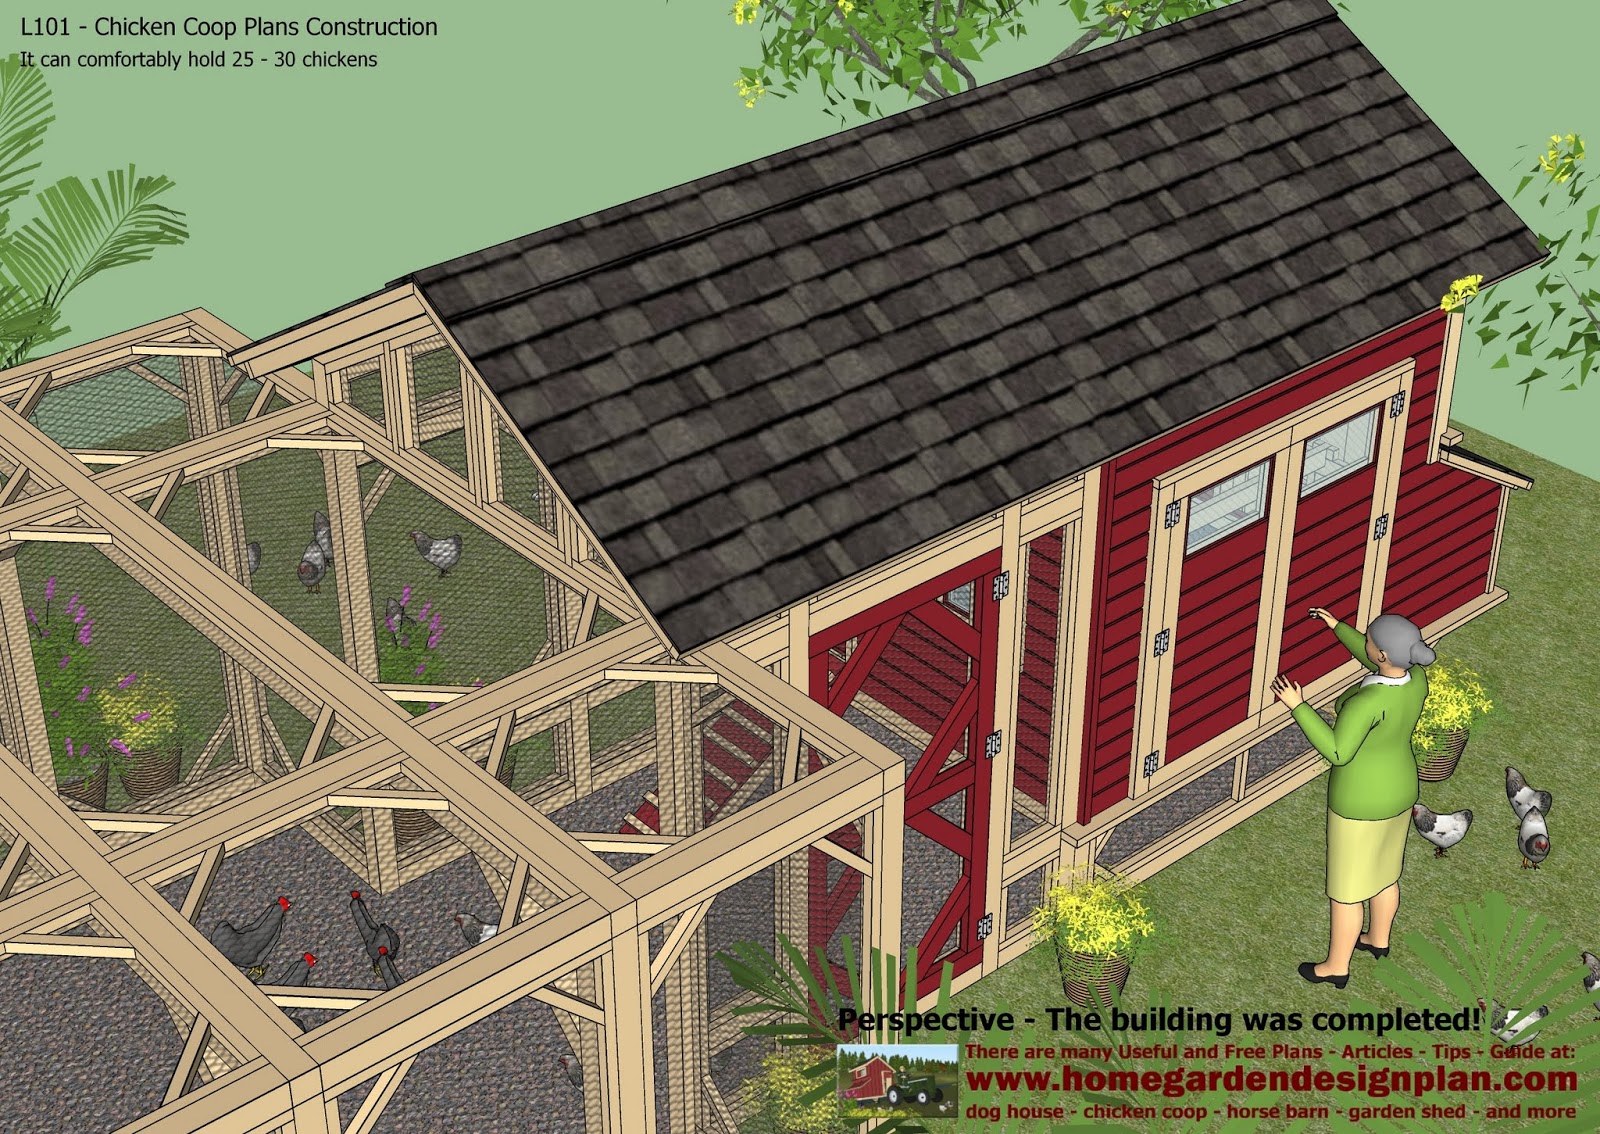 ... - Chicken Coop Design - How To Build An Insulated Chicken Coop